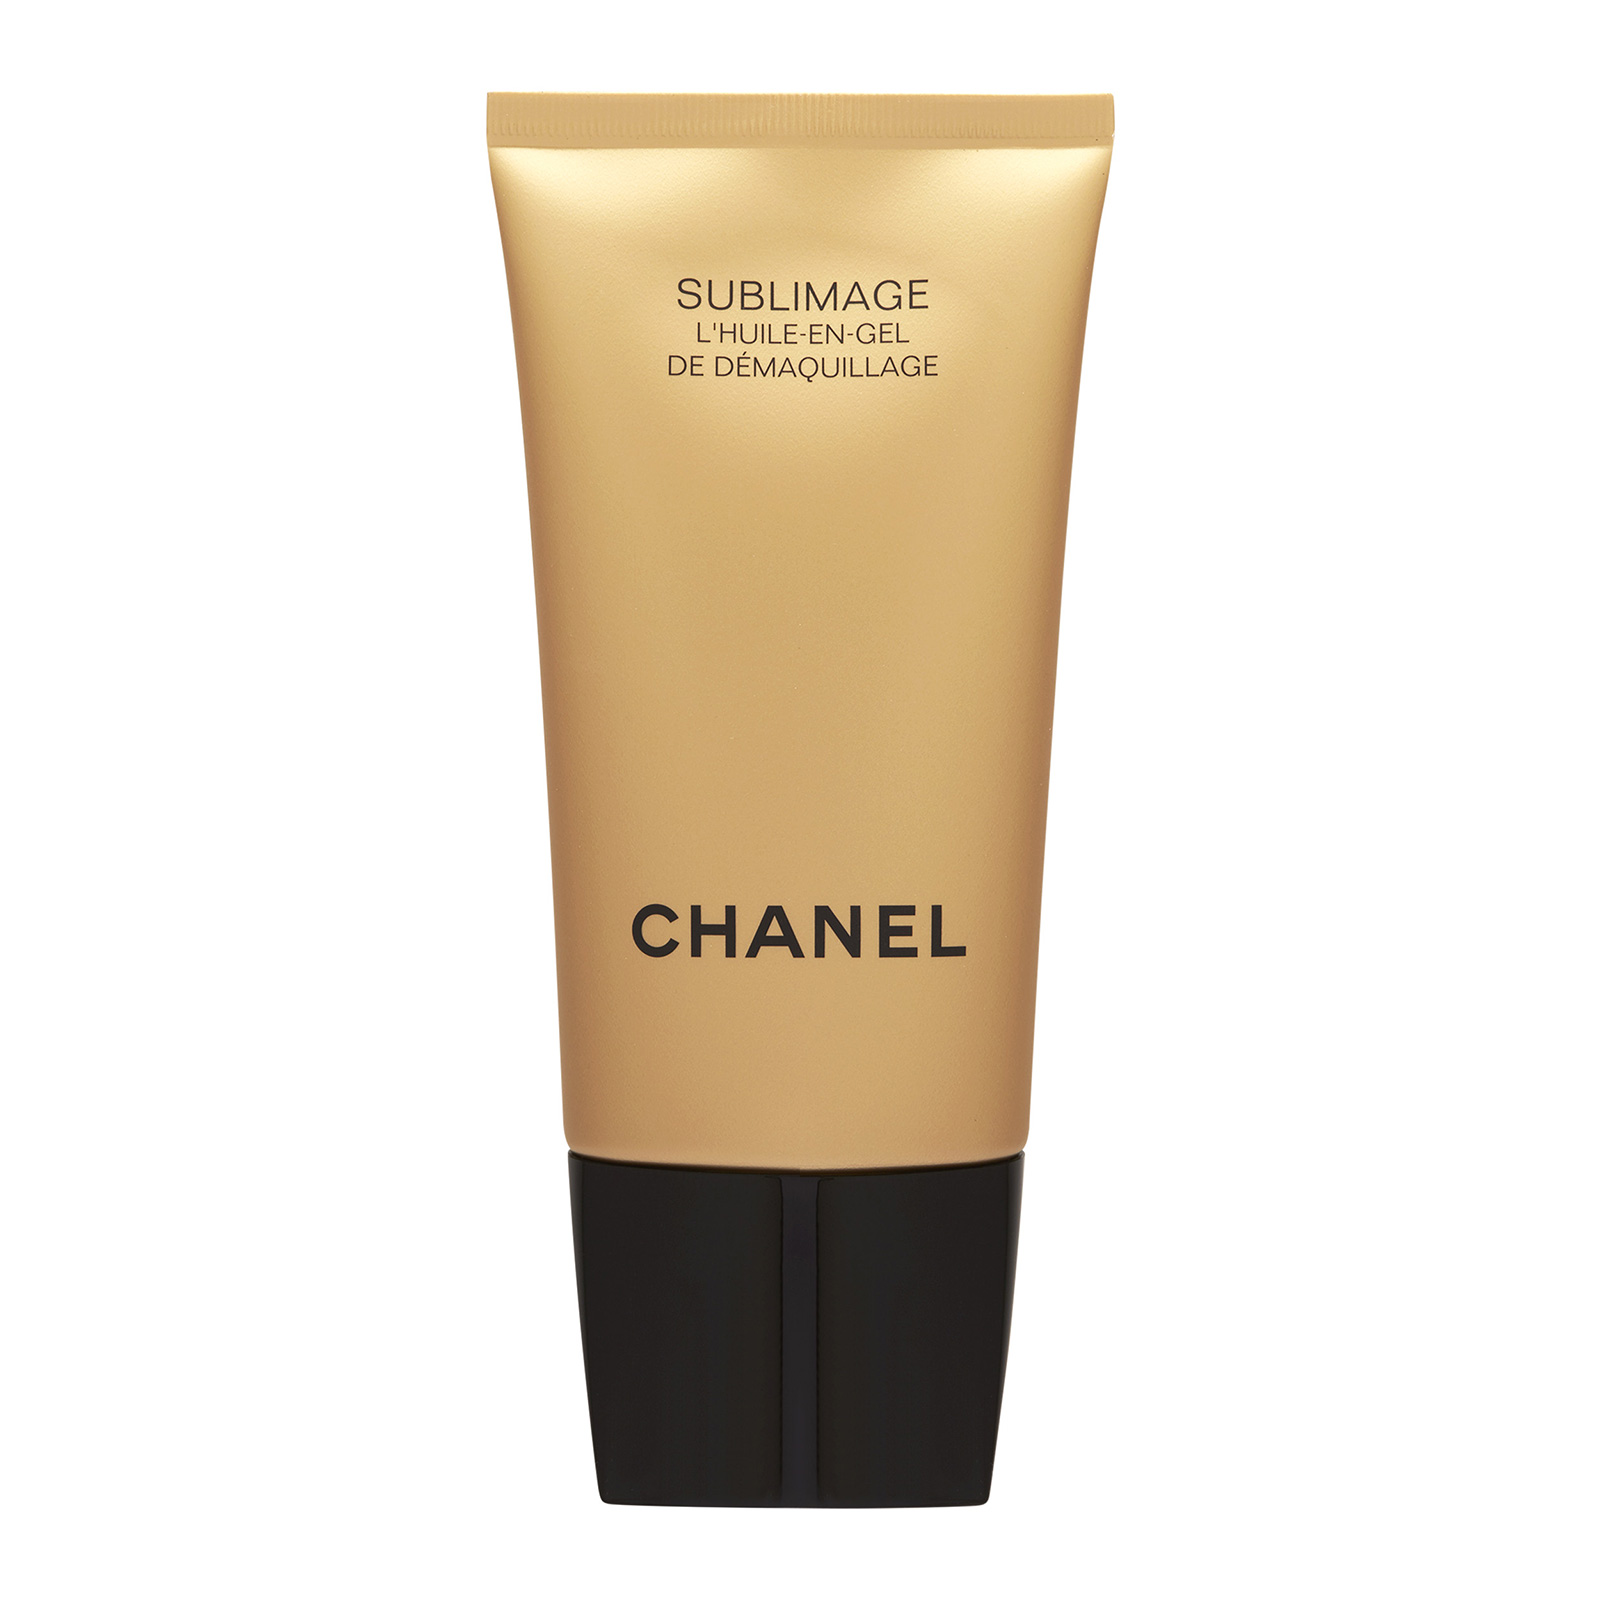 Chanels Latest Drop for Sublimage Makes Cleansing a Luxury  Vogue Arabia